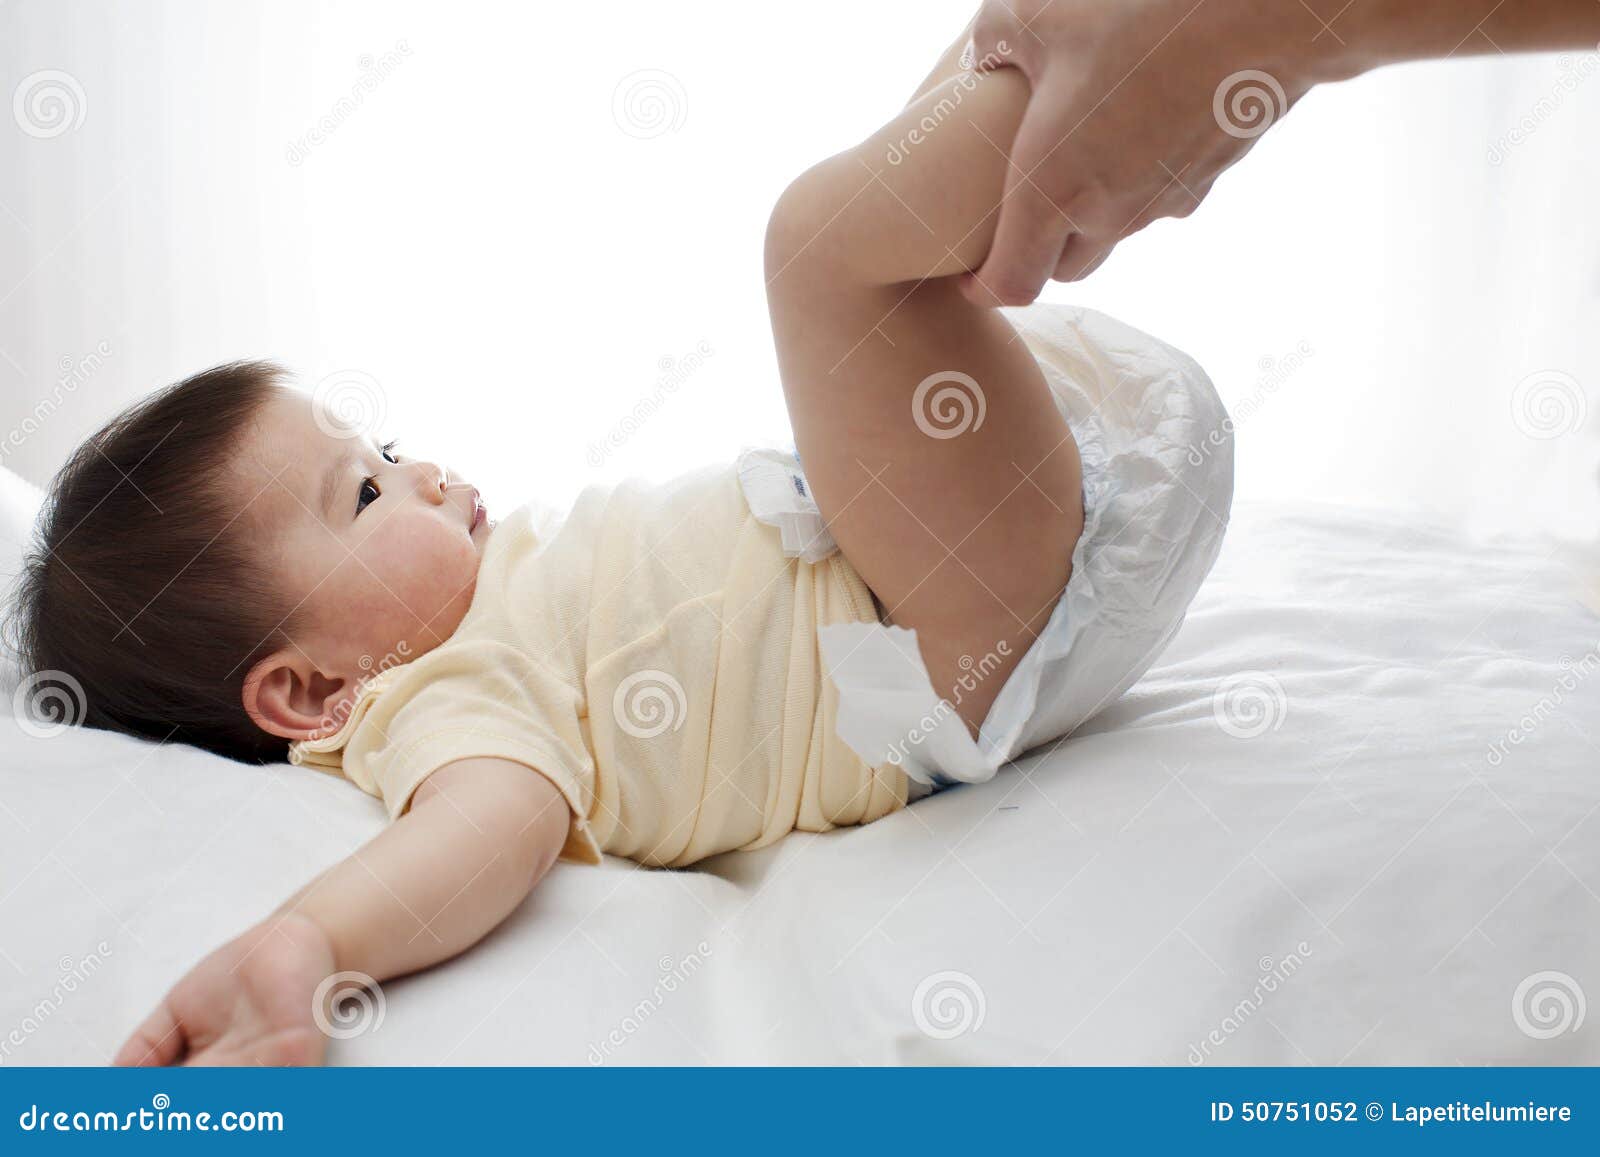 a small cute little baby girl was lying down, her diaper was being changed by her dad